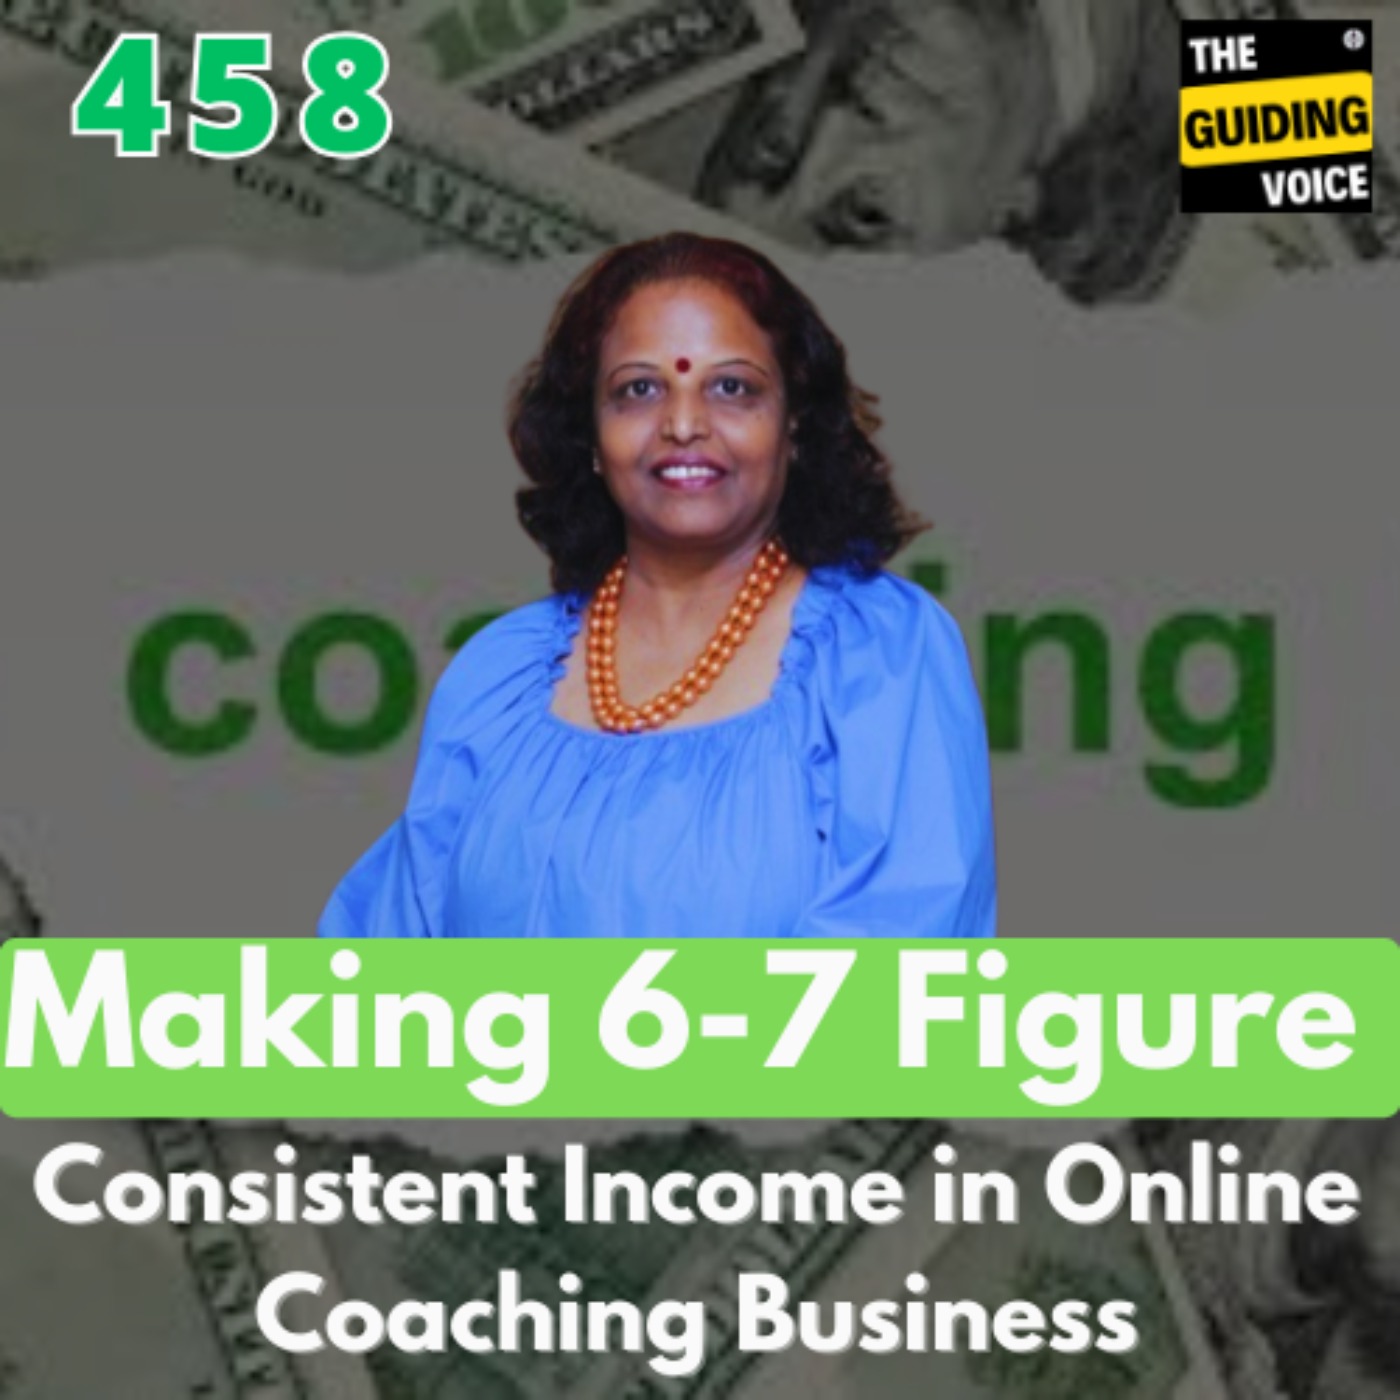 Making 6-7 figure consistent income in Online Coaching Business | Ranjini Sanjay | #TGV458